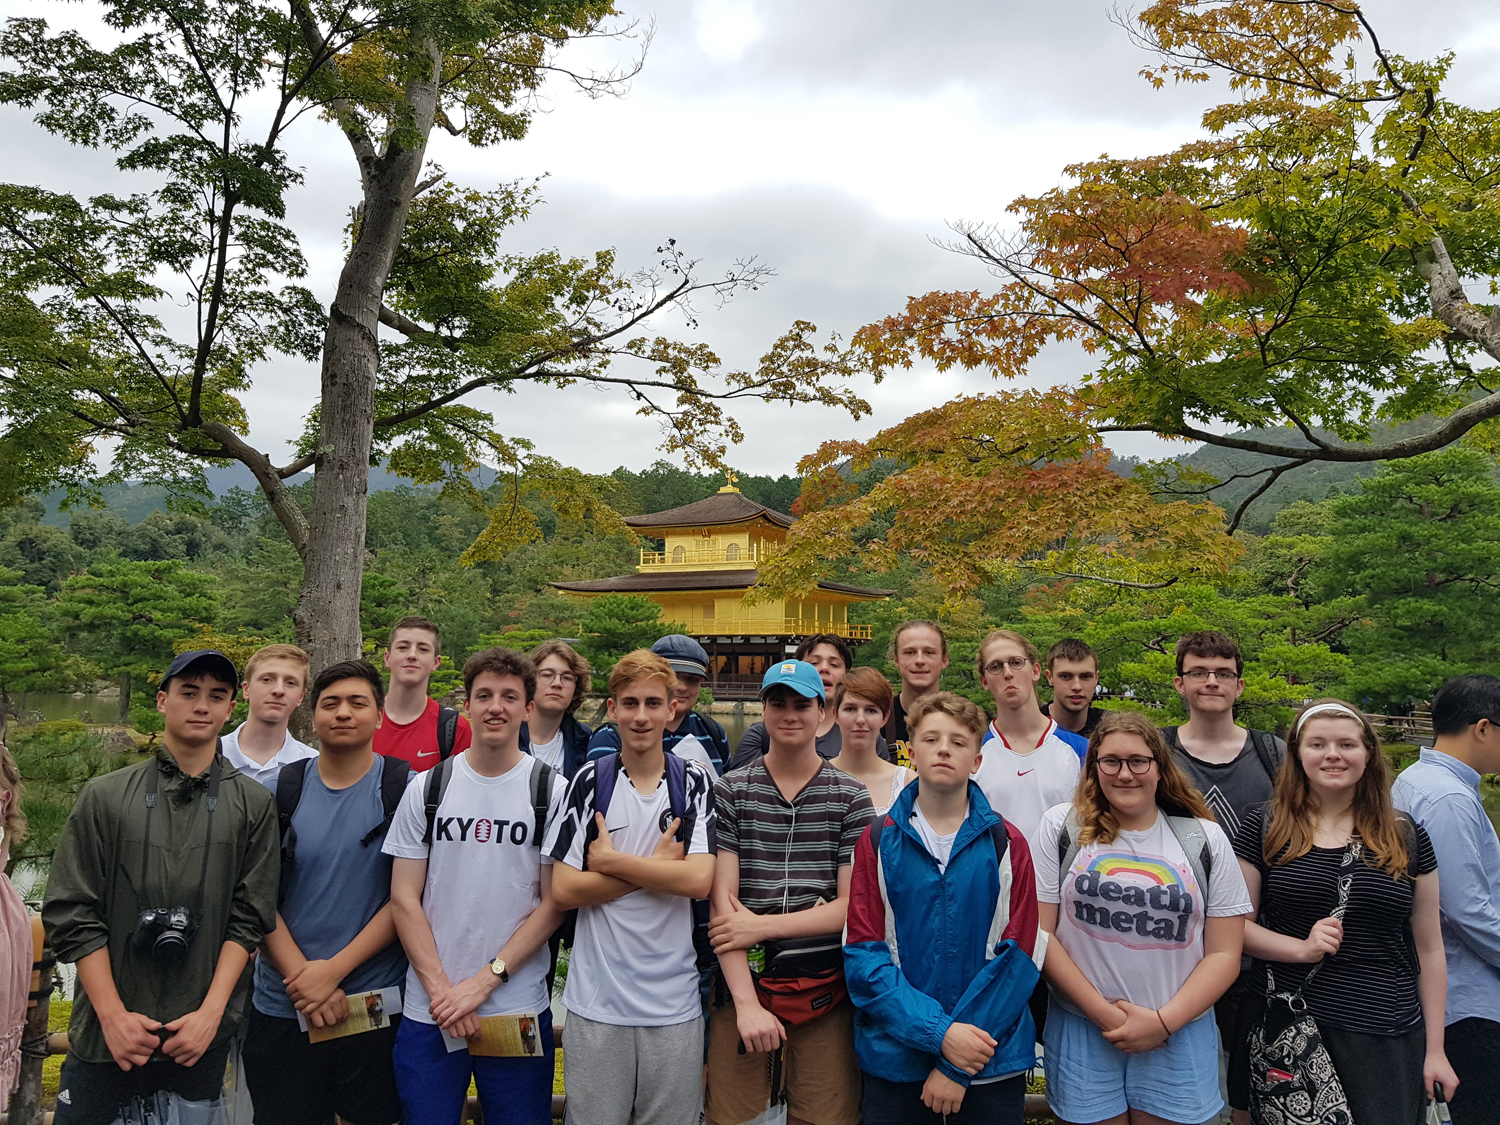 The Kapiti College students gathered for a group photo in front of the Golden Pavilion shrine